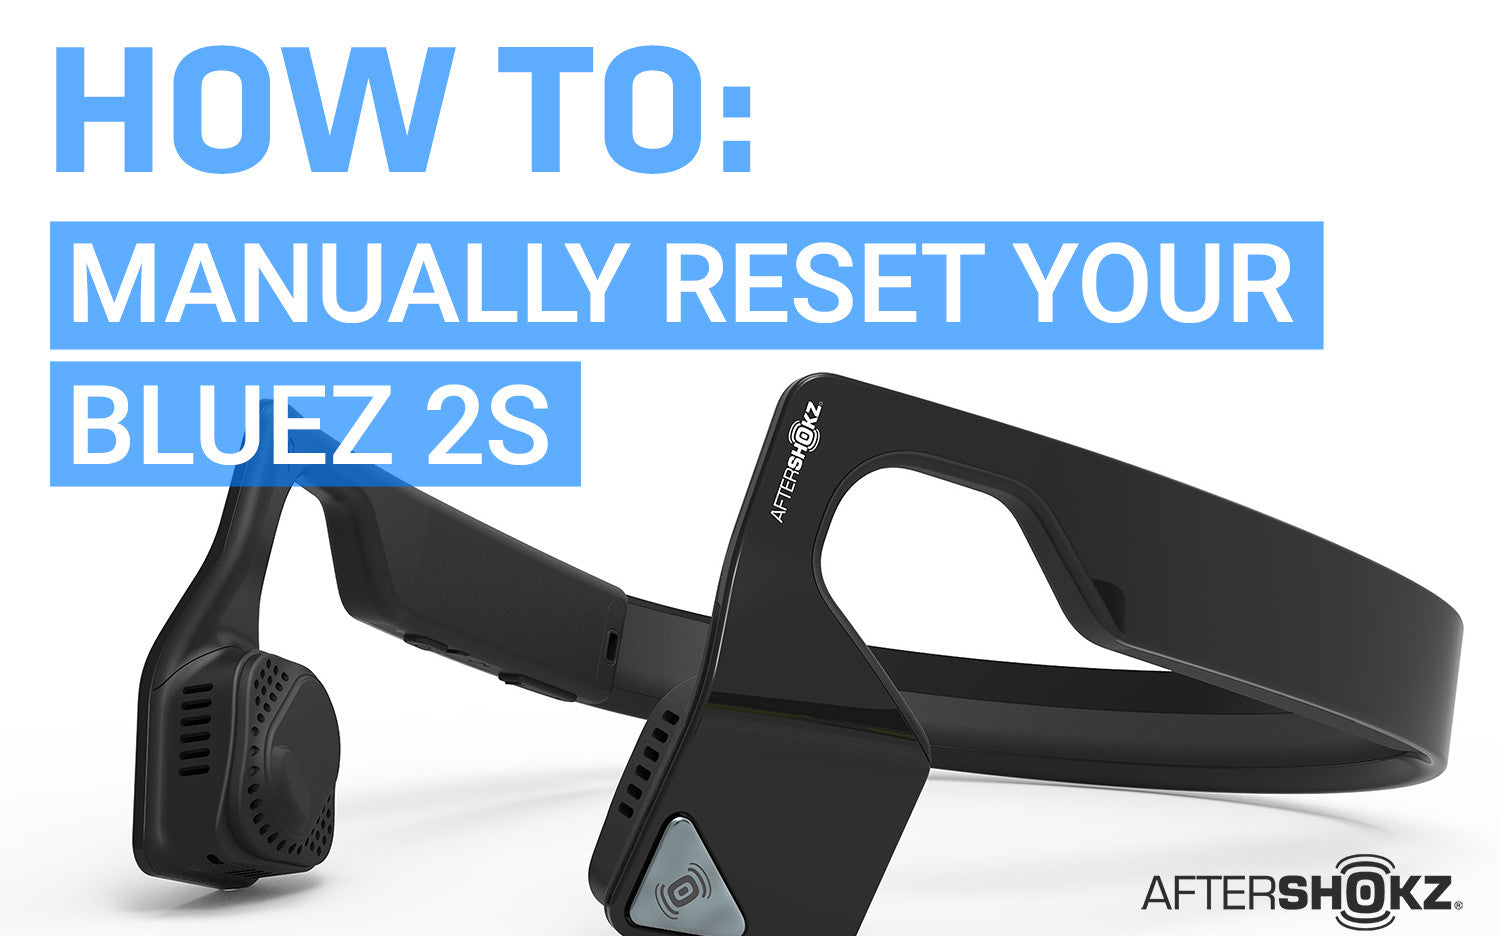 How To Manually Reset Your Bluez 2S Wired Headphones